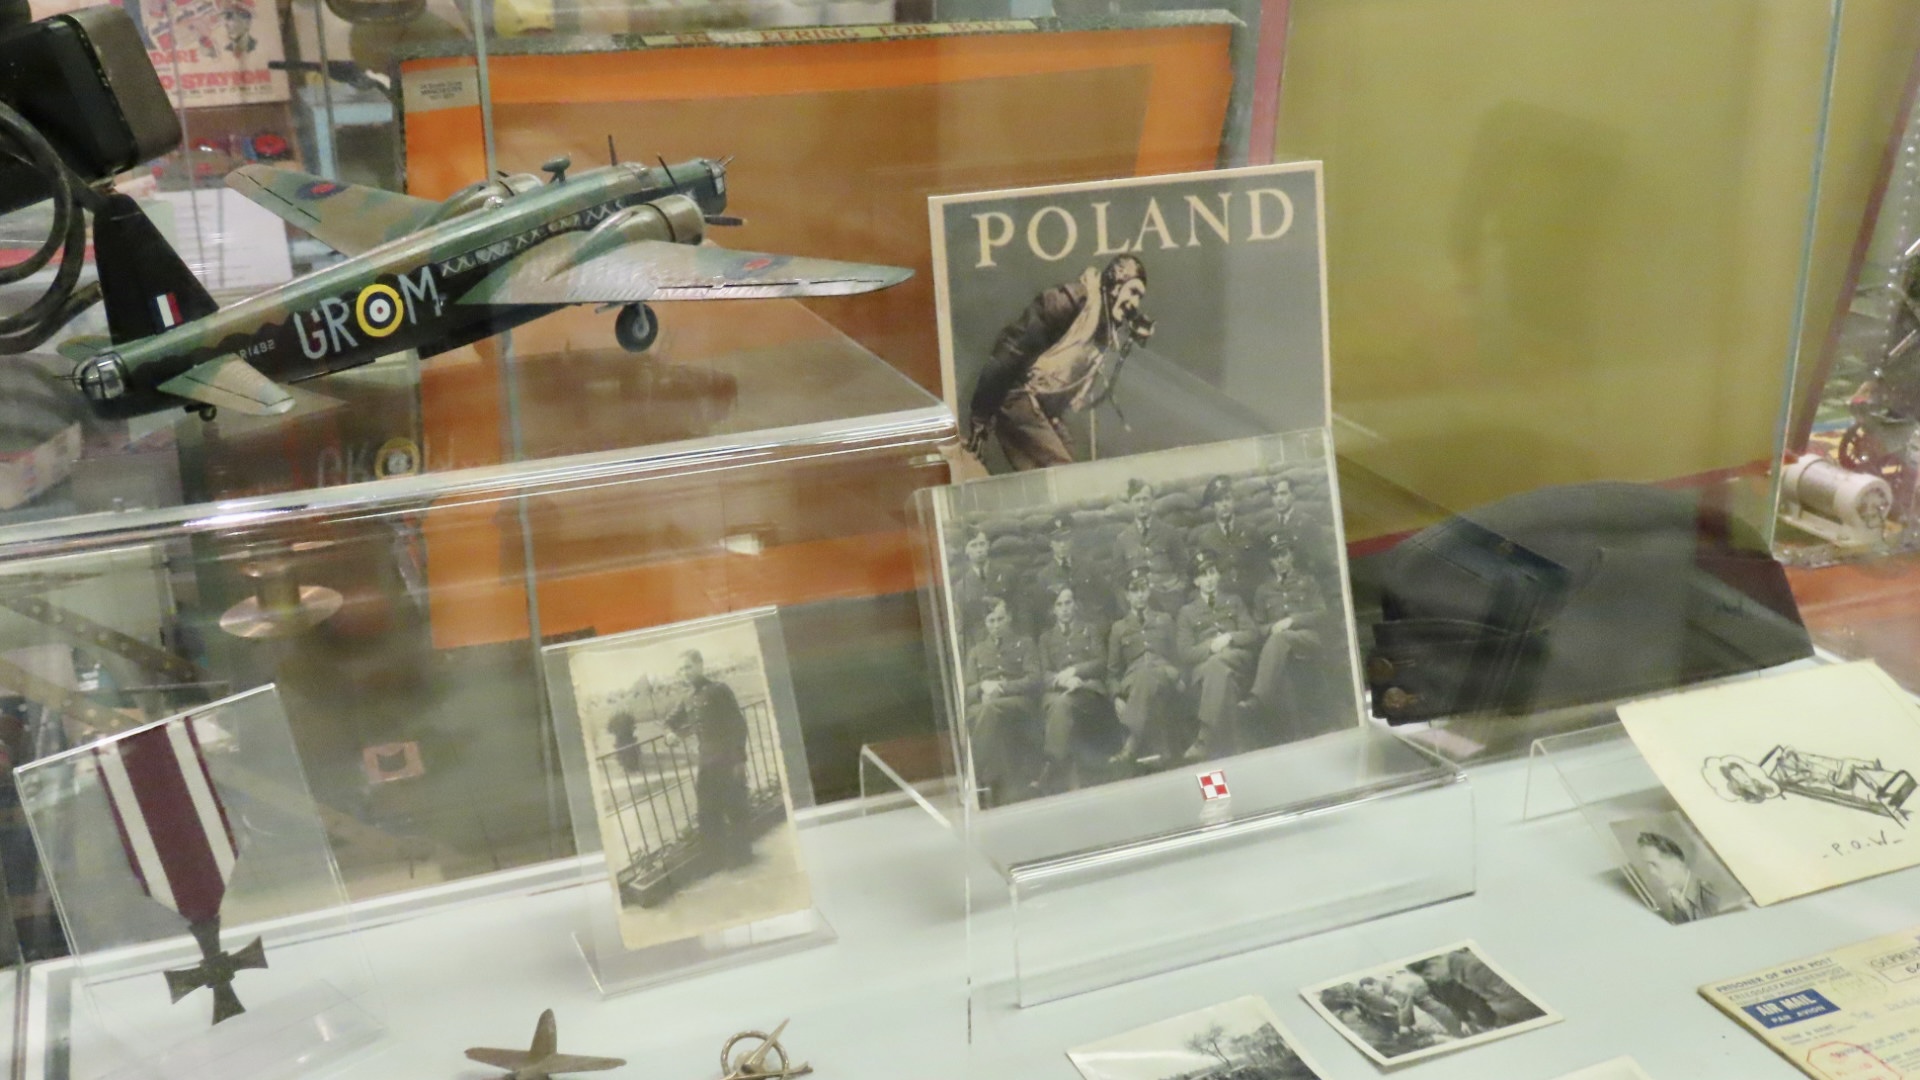 Polish air crews who fought alongside Great Britain against Nazi Germany during World War II are being celebrated in a special new exhibition at The Atkinson in Southport